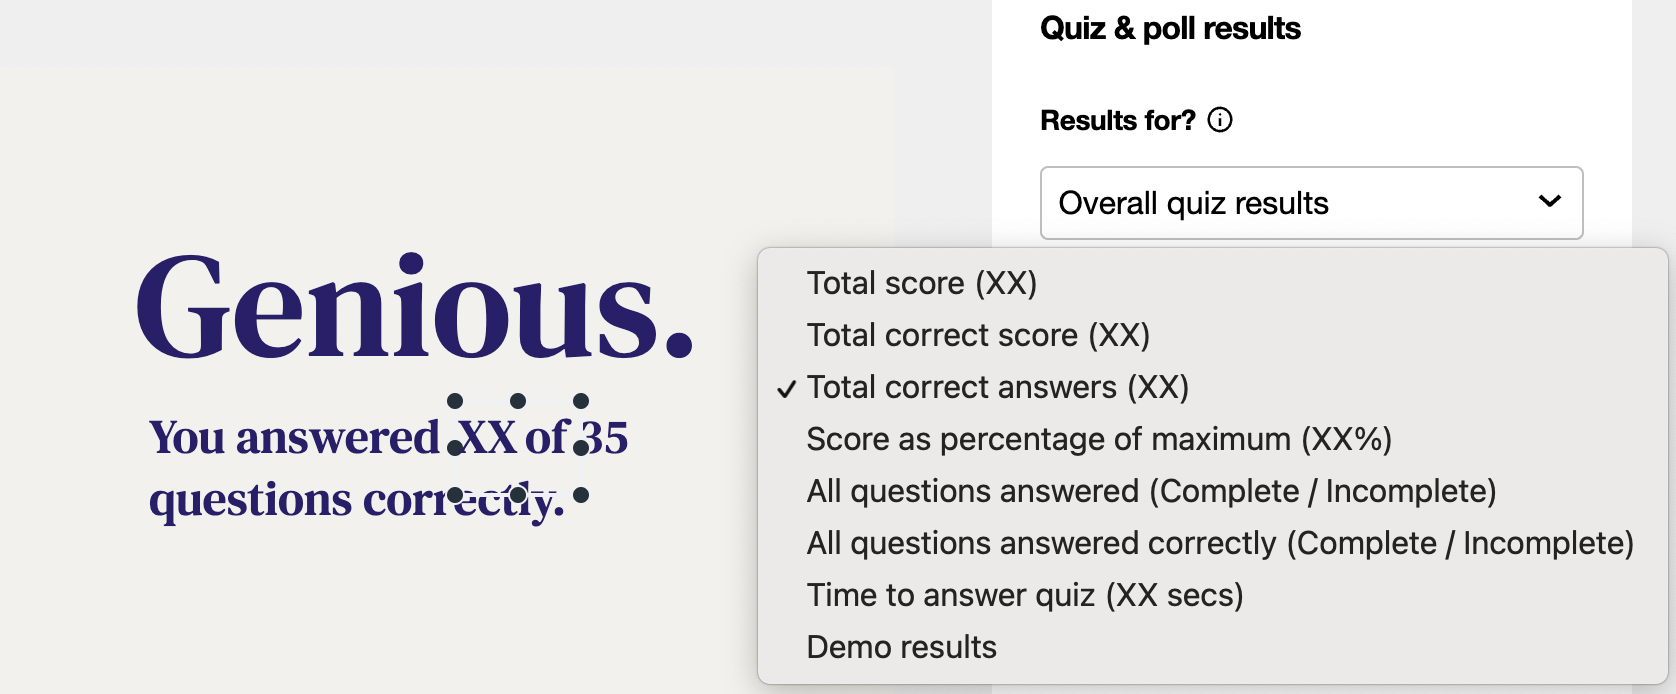 overall_quiz_results.png